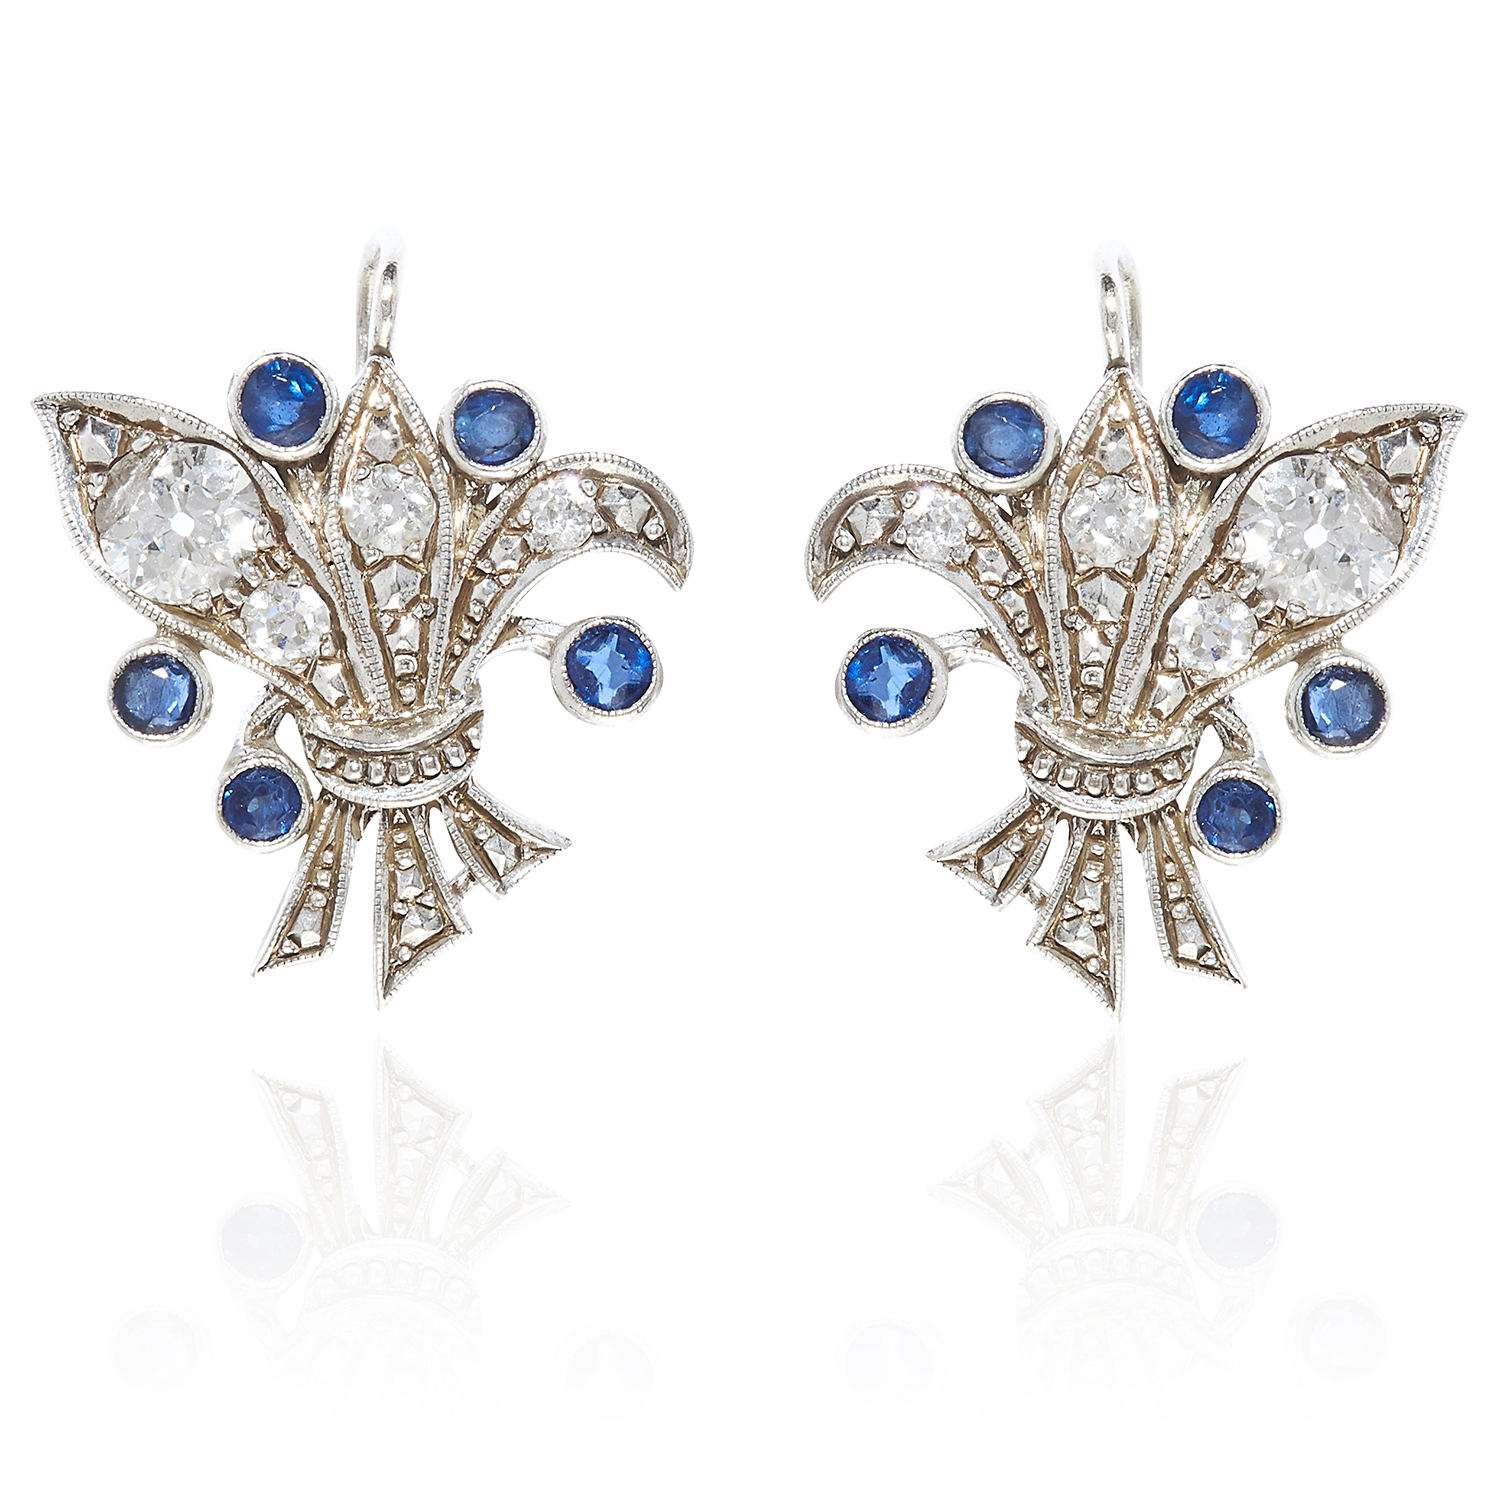 A PAIR OF SAPPHIRE AND DIAMOND EARRINGS in white gold, set with round cut diamonds and sapphires,